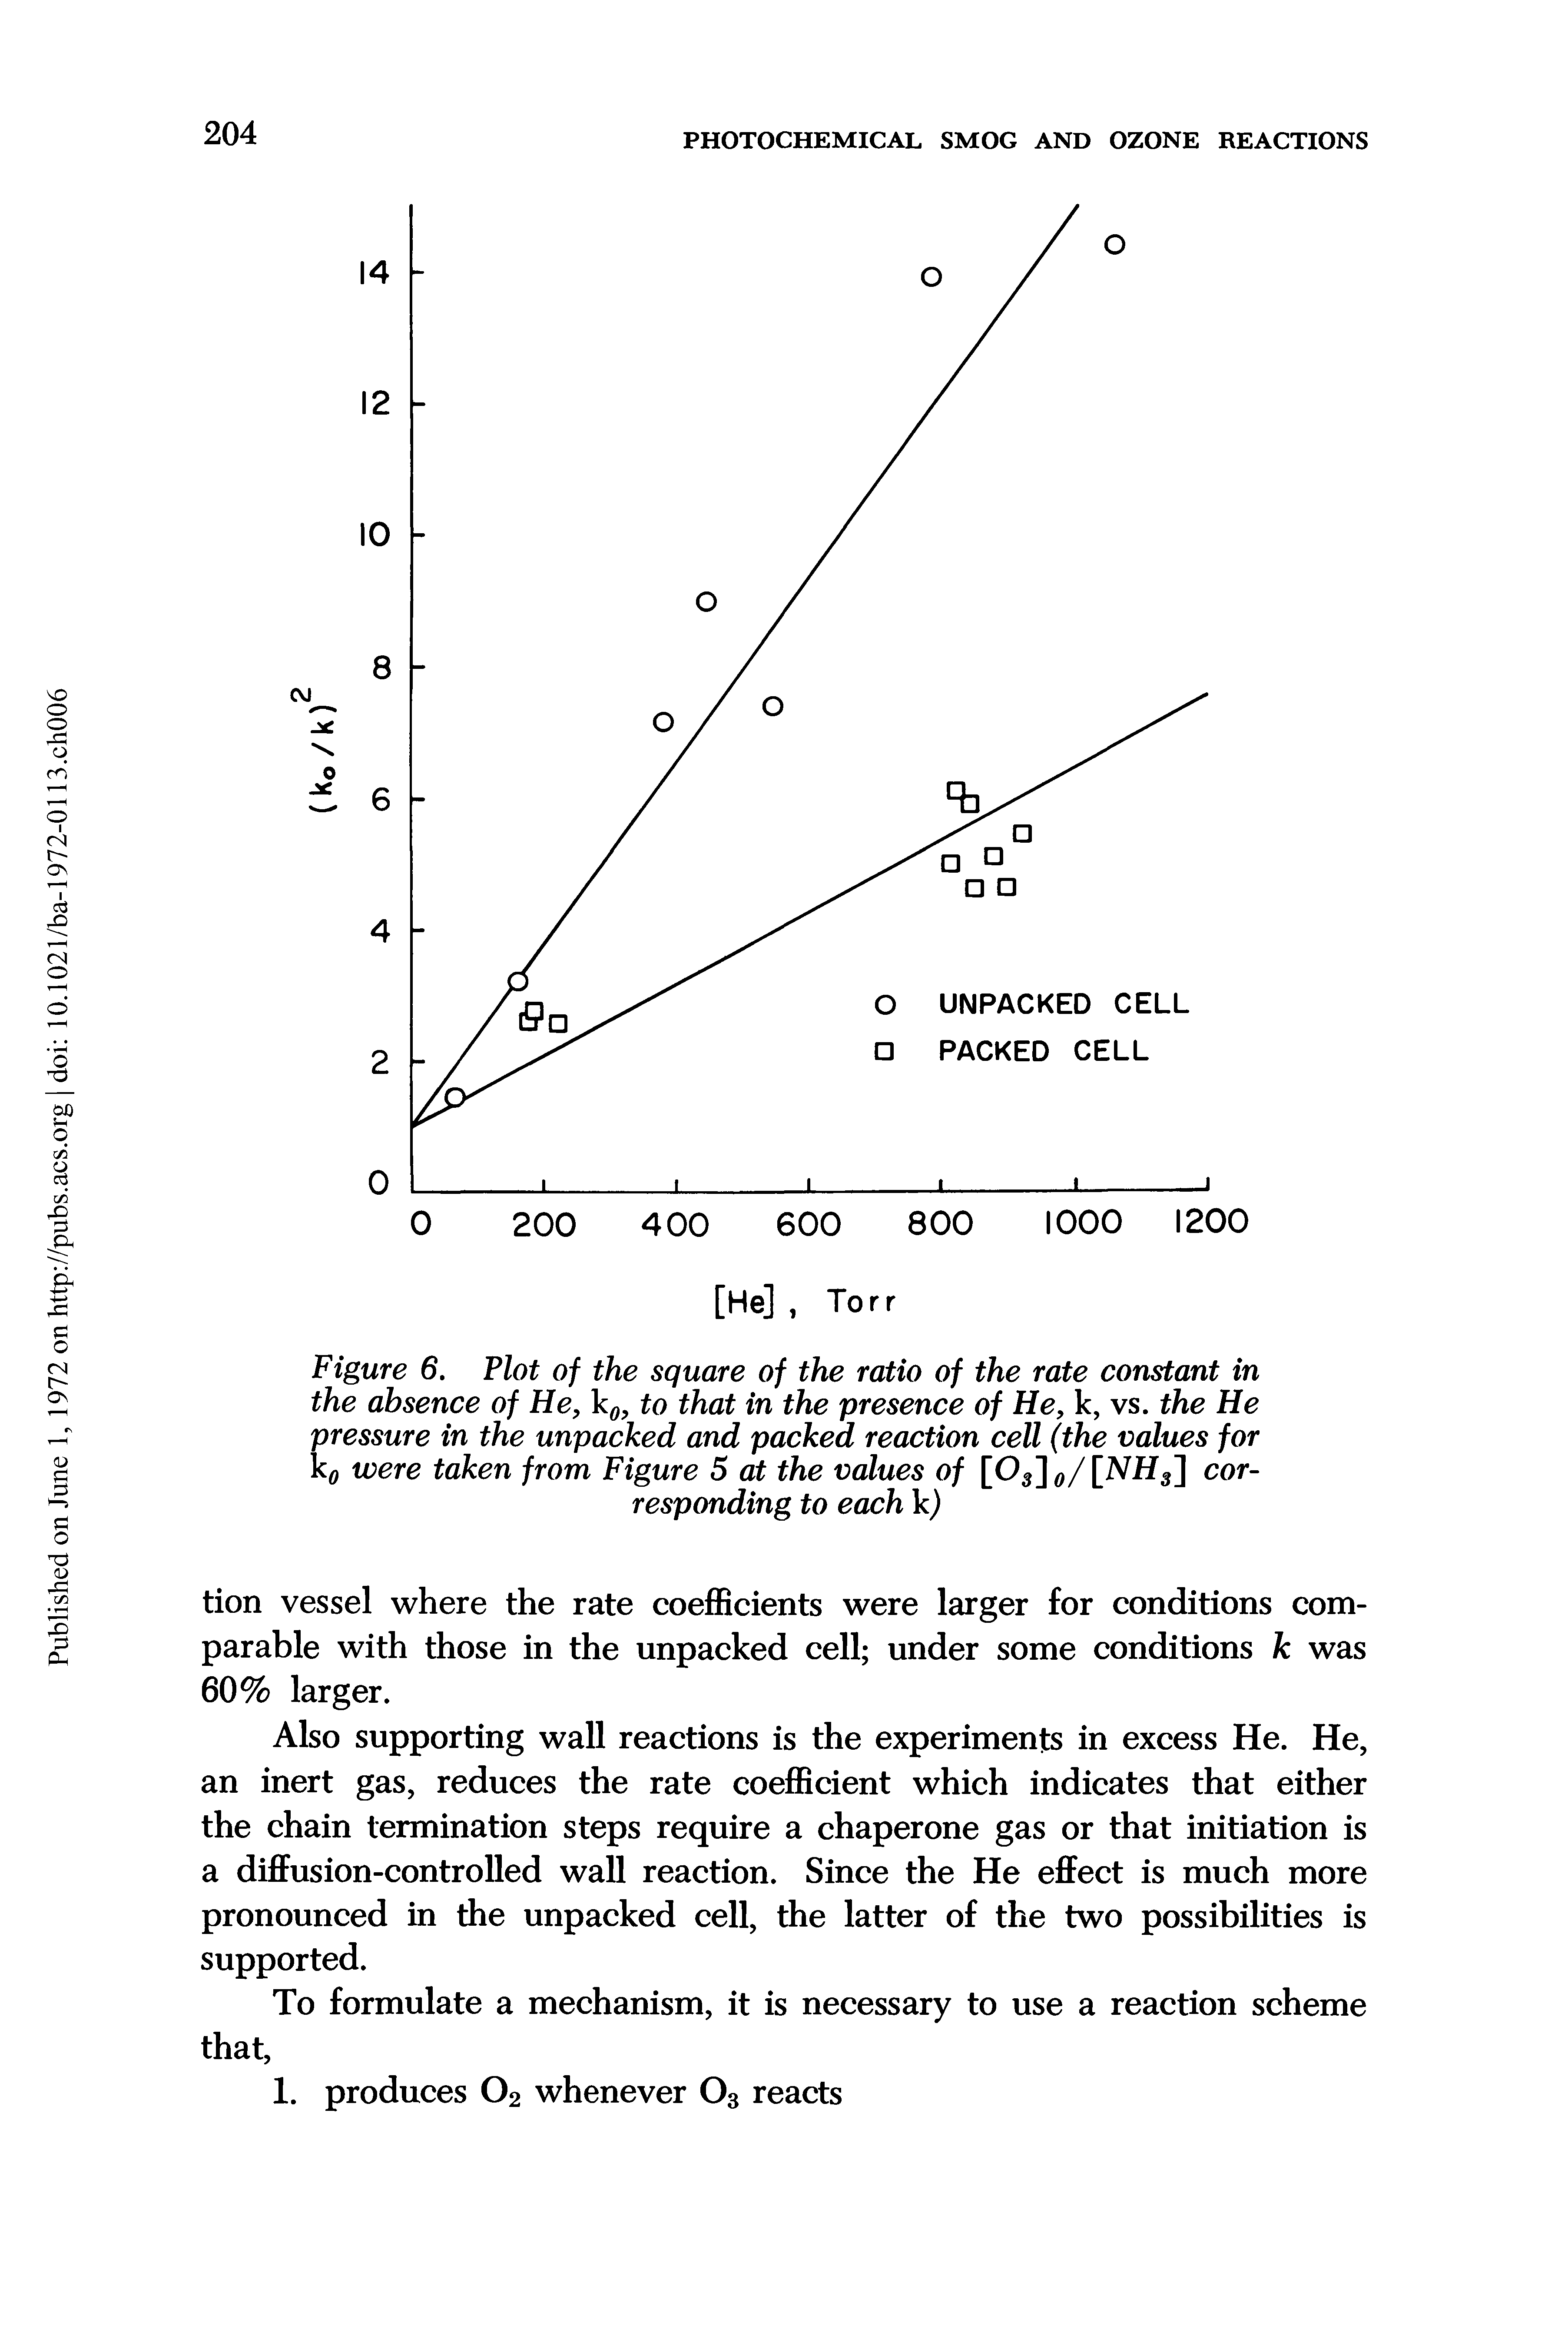 Figure 6. Plot of the square of the ratio of the rate constant in the absence of He, to that in the presence of He, k, vs. the He pressure in the unpacked and packed reaction cell (the values for ko were taken from Figure 5 at the values of [Og lo/lNHs ] corresponding to each k)...